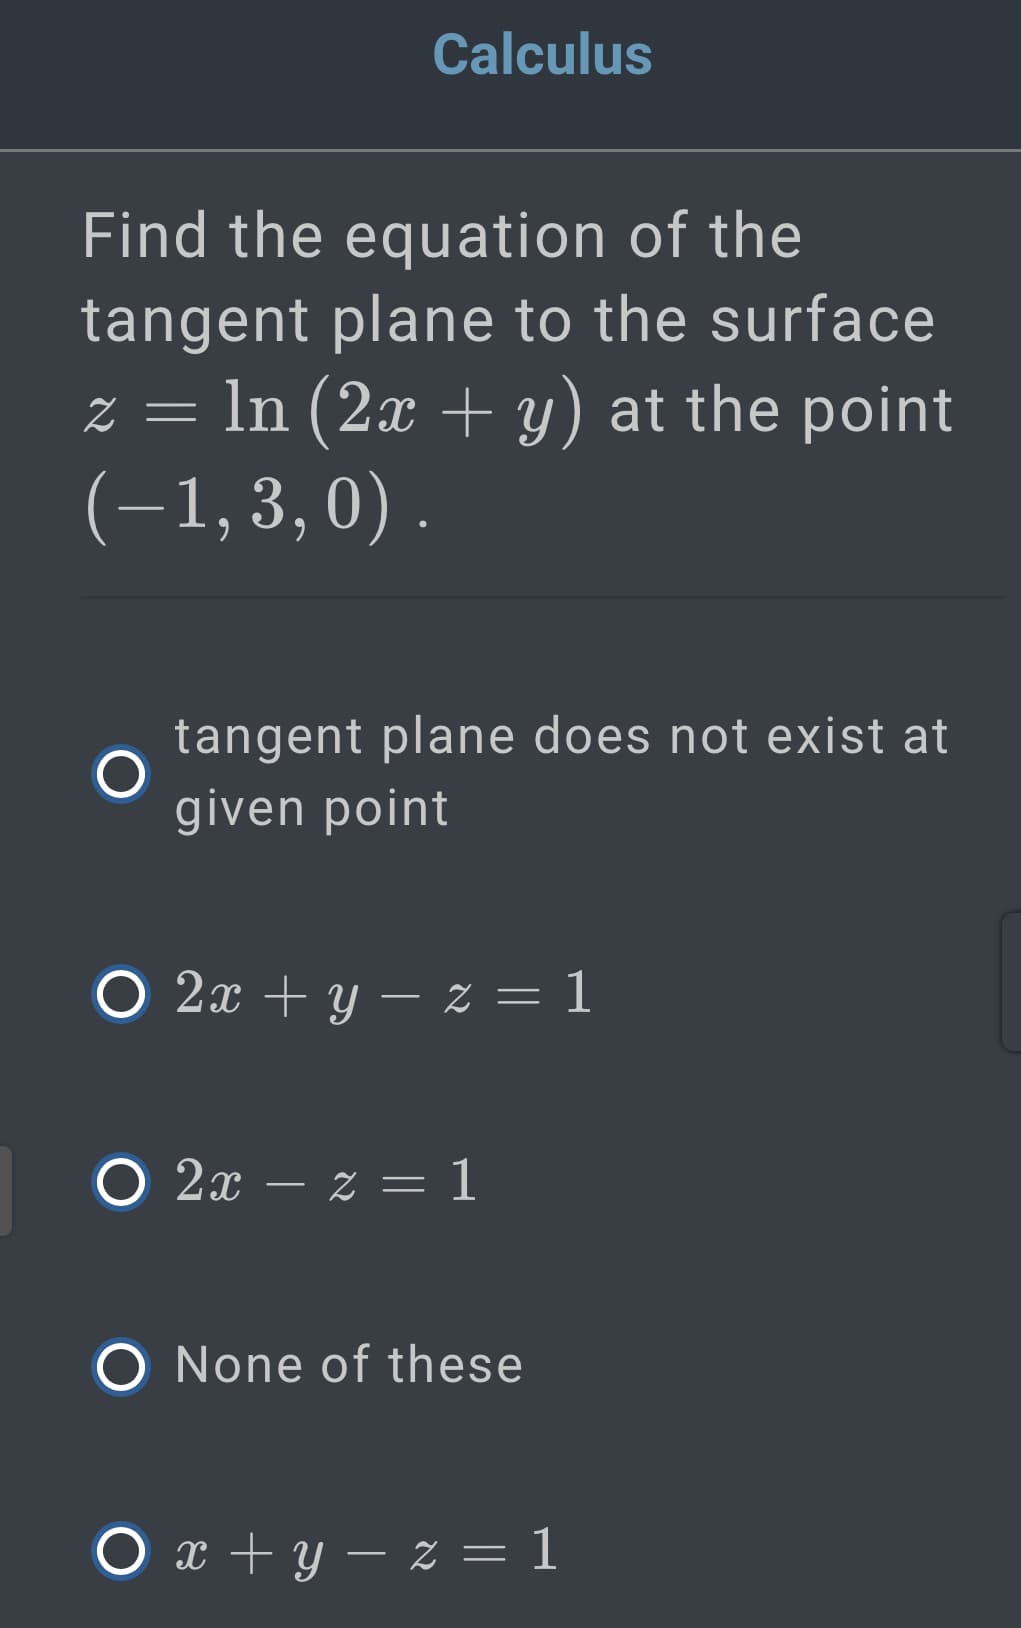 Calculus
Find the equation of the
tangent plane to the surface
z = ln (2x + y) at the point
(-1,3,0) .
tangent plane does not exist at
given point
Ο 2x +y-z= 1
О 2х — х — 1
O None of these
O x + y – z = 1
